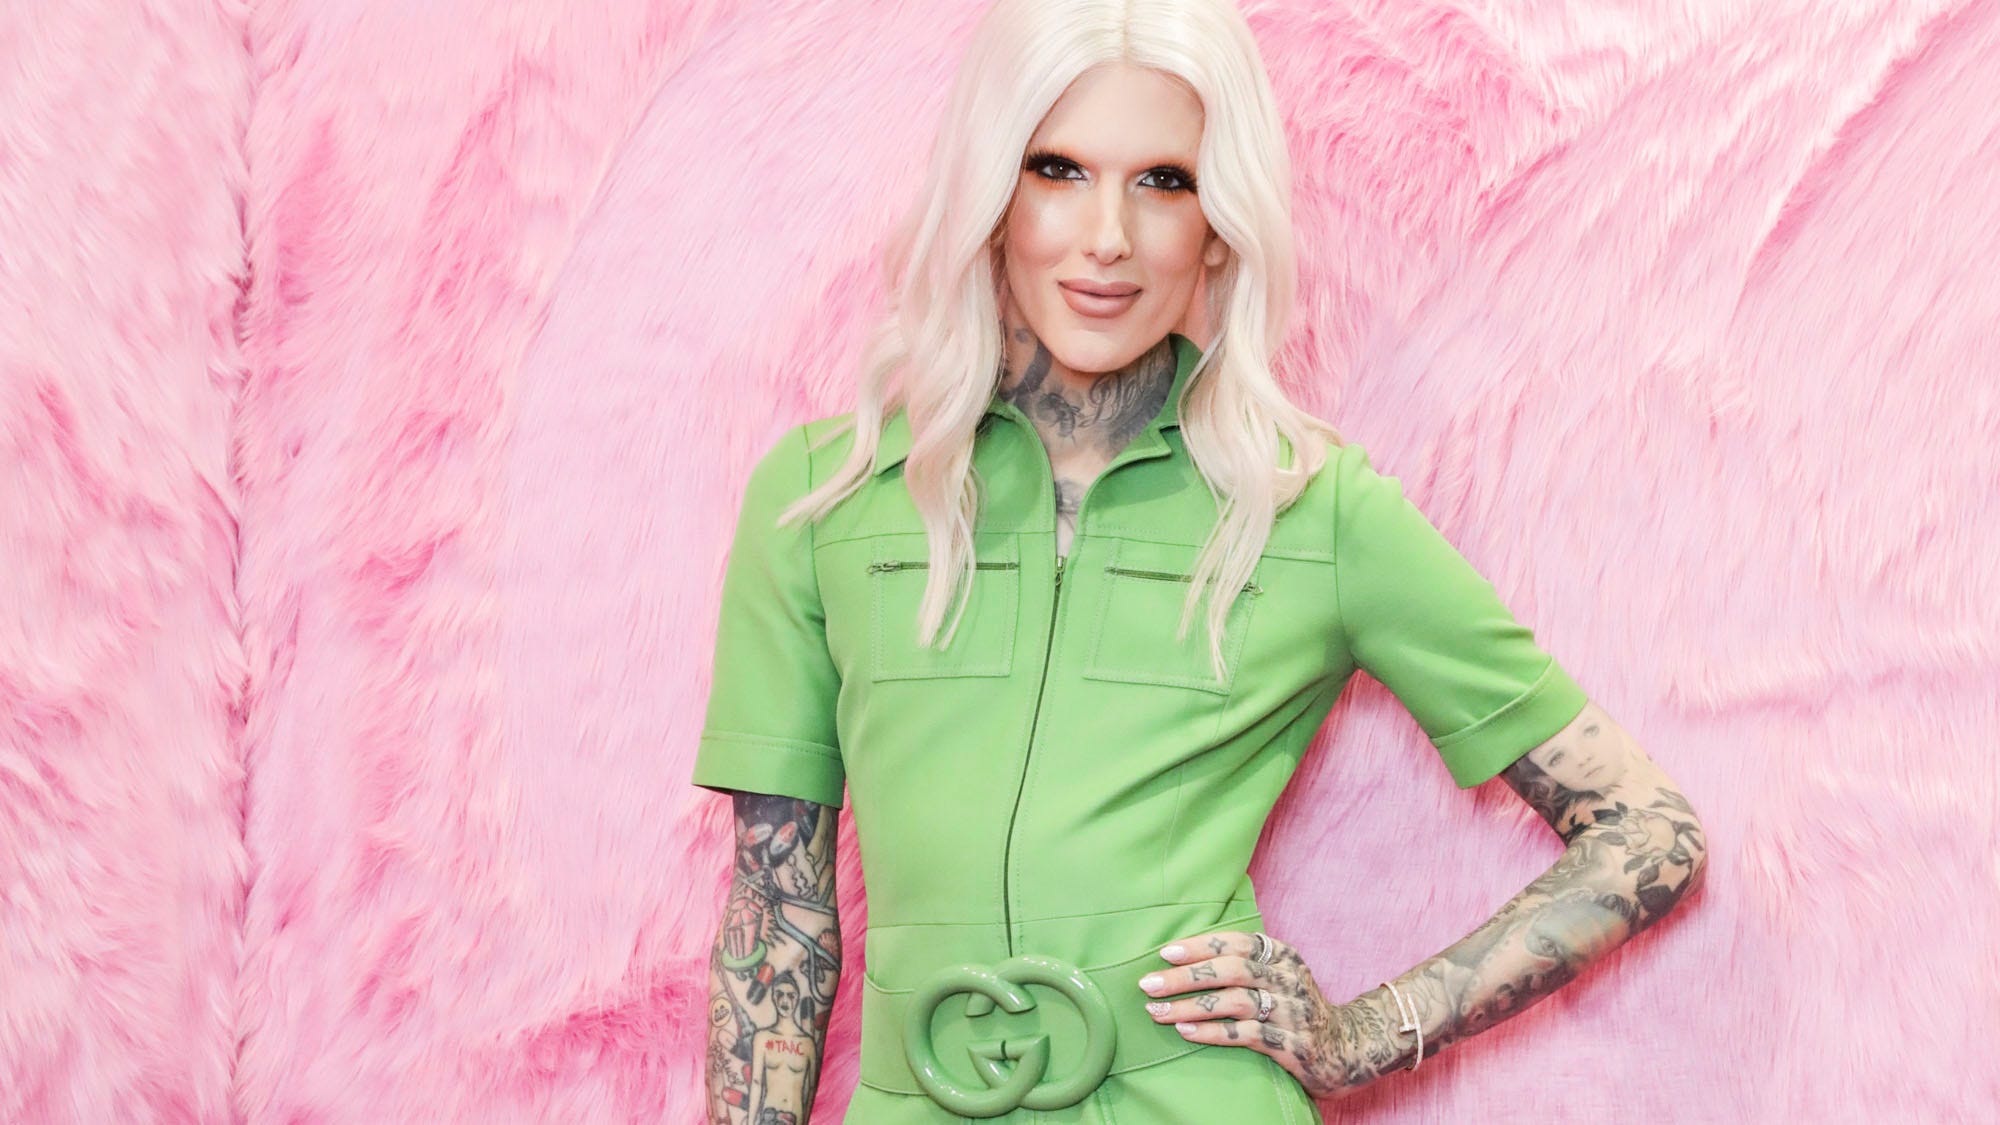 Jeffree Star is in 'excruciating pain' following his car accident: 'Time to heal'